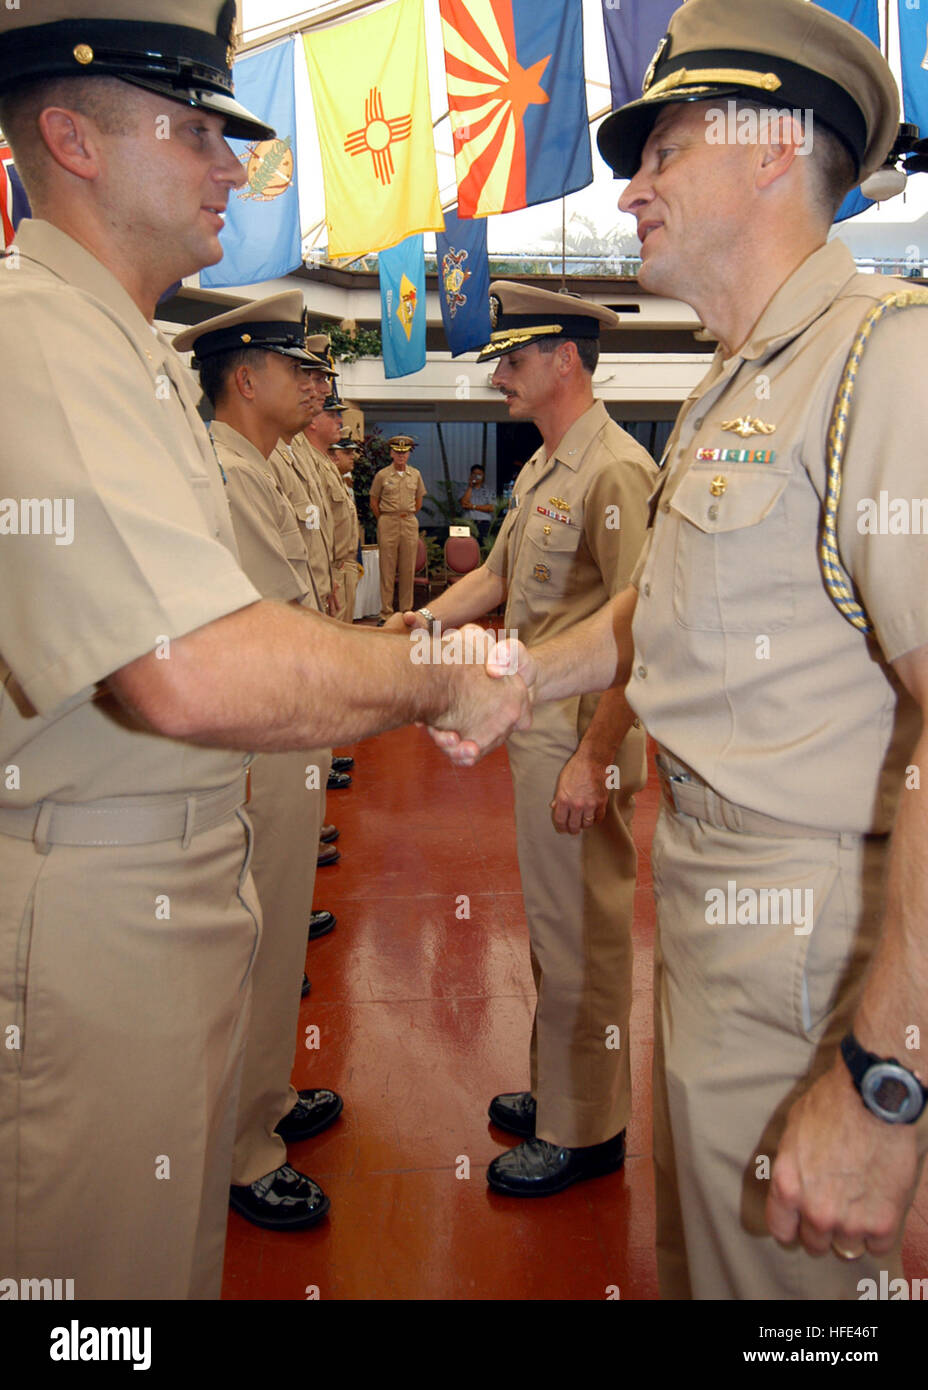 040916-N-3019M-001 Pearl Harbor, Hawaii (Sept. 16, 2004) - Commander, Navy Region Hawaii and Commander, Naval Surface Group, Middle Pacific, Capt. Michael C. Vitale and Commanding Officer, Naval Station Pearl Harbor, Capt. Ronald R. Cox, congratulate new chief petty officers (CPO) during their induction into the CPO community at a pinning ceremony held on board Pearl Harbor. The pinning ceremony is the culmination of six weeks of arduous physical training, practical team building and leadership exercises that will prepare them for their new duties and responsibilities as CPOÕs. U.S. Navy photo Stock Photo